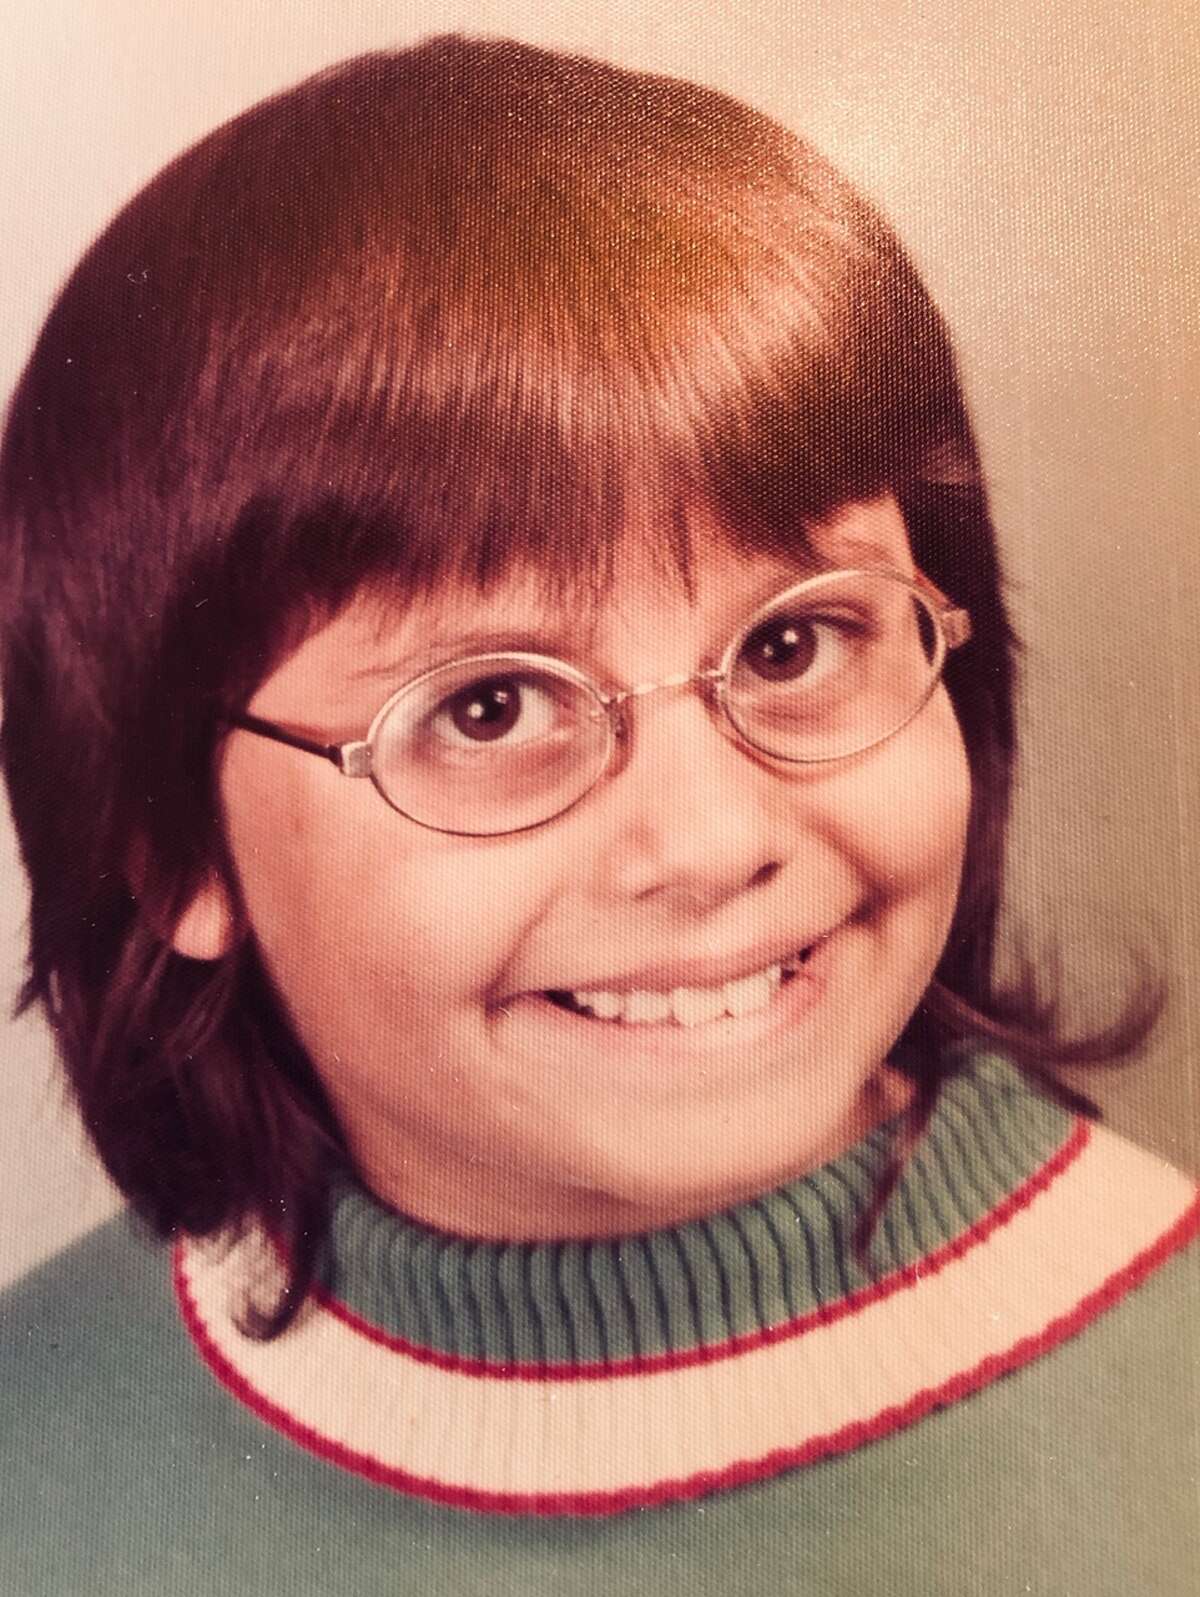 1. In third grade I attended Ben Franklin Elementary School where I honored the great man by wearing his spectacles.